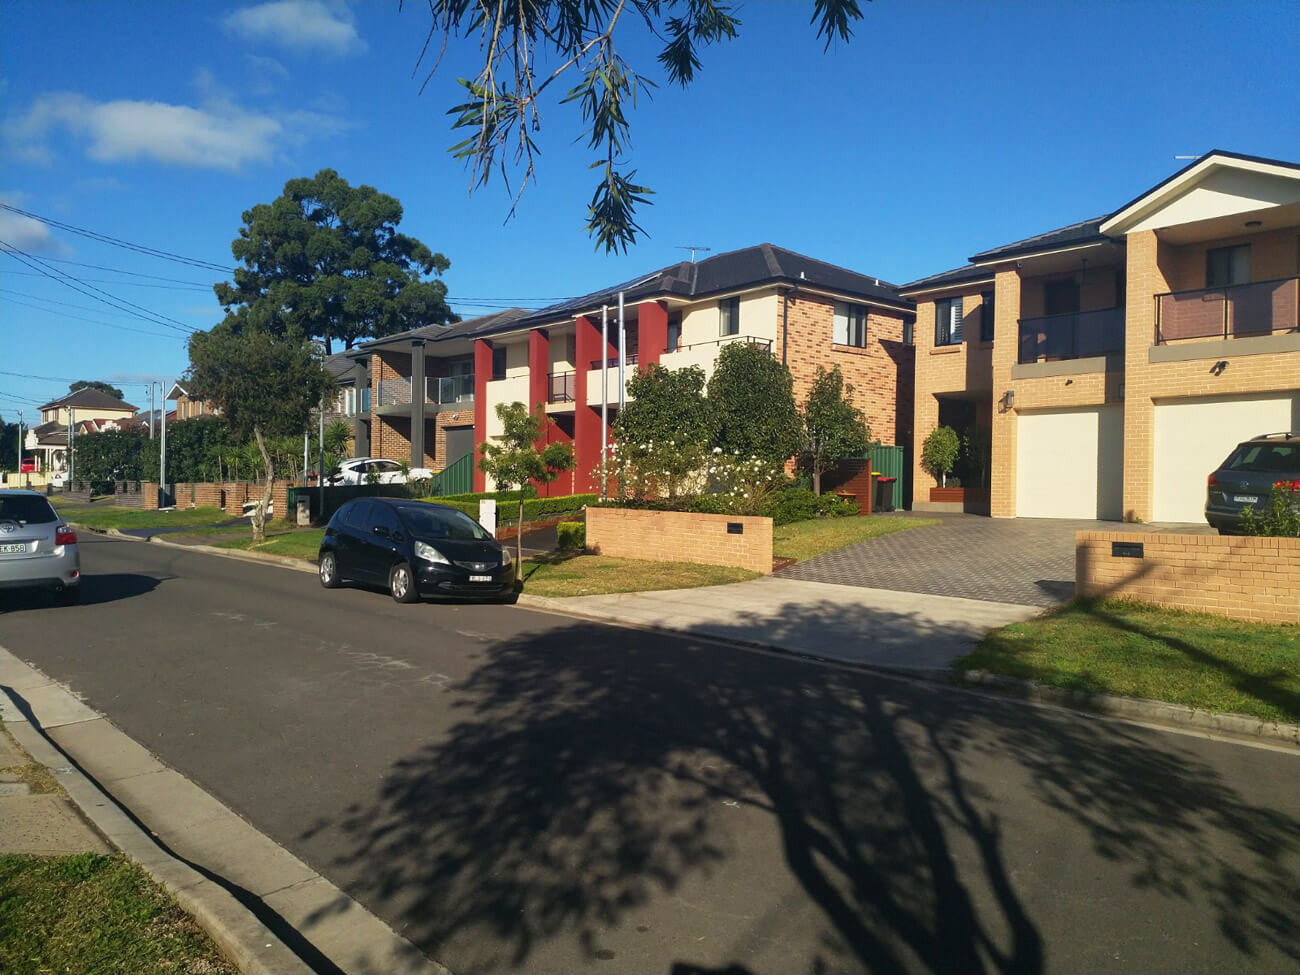 Revesby houses